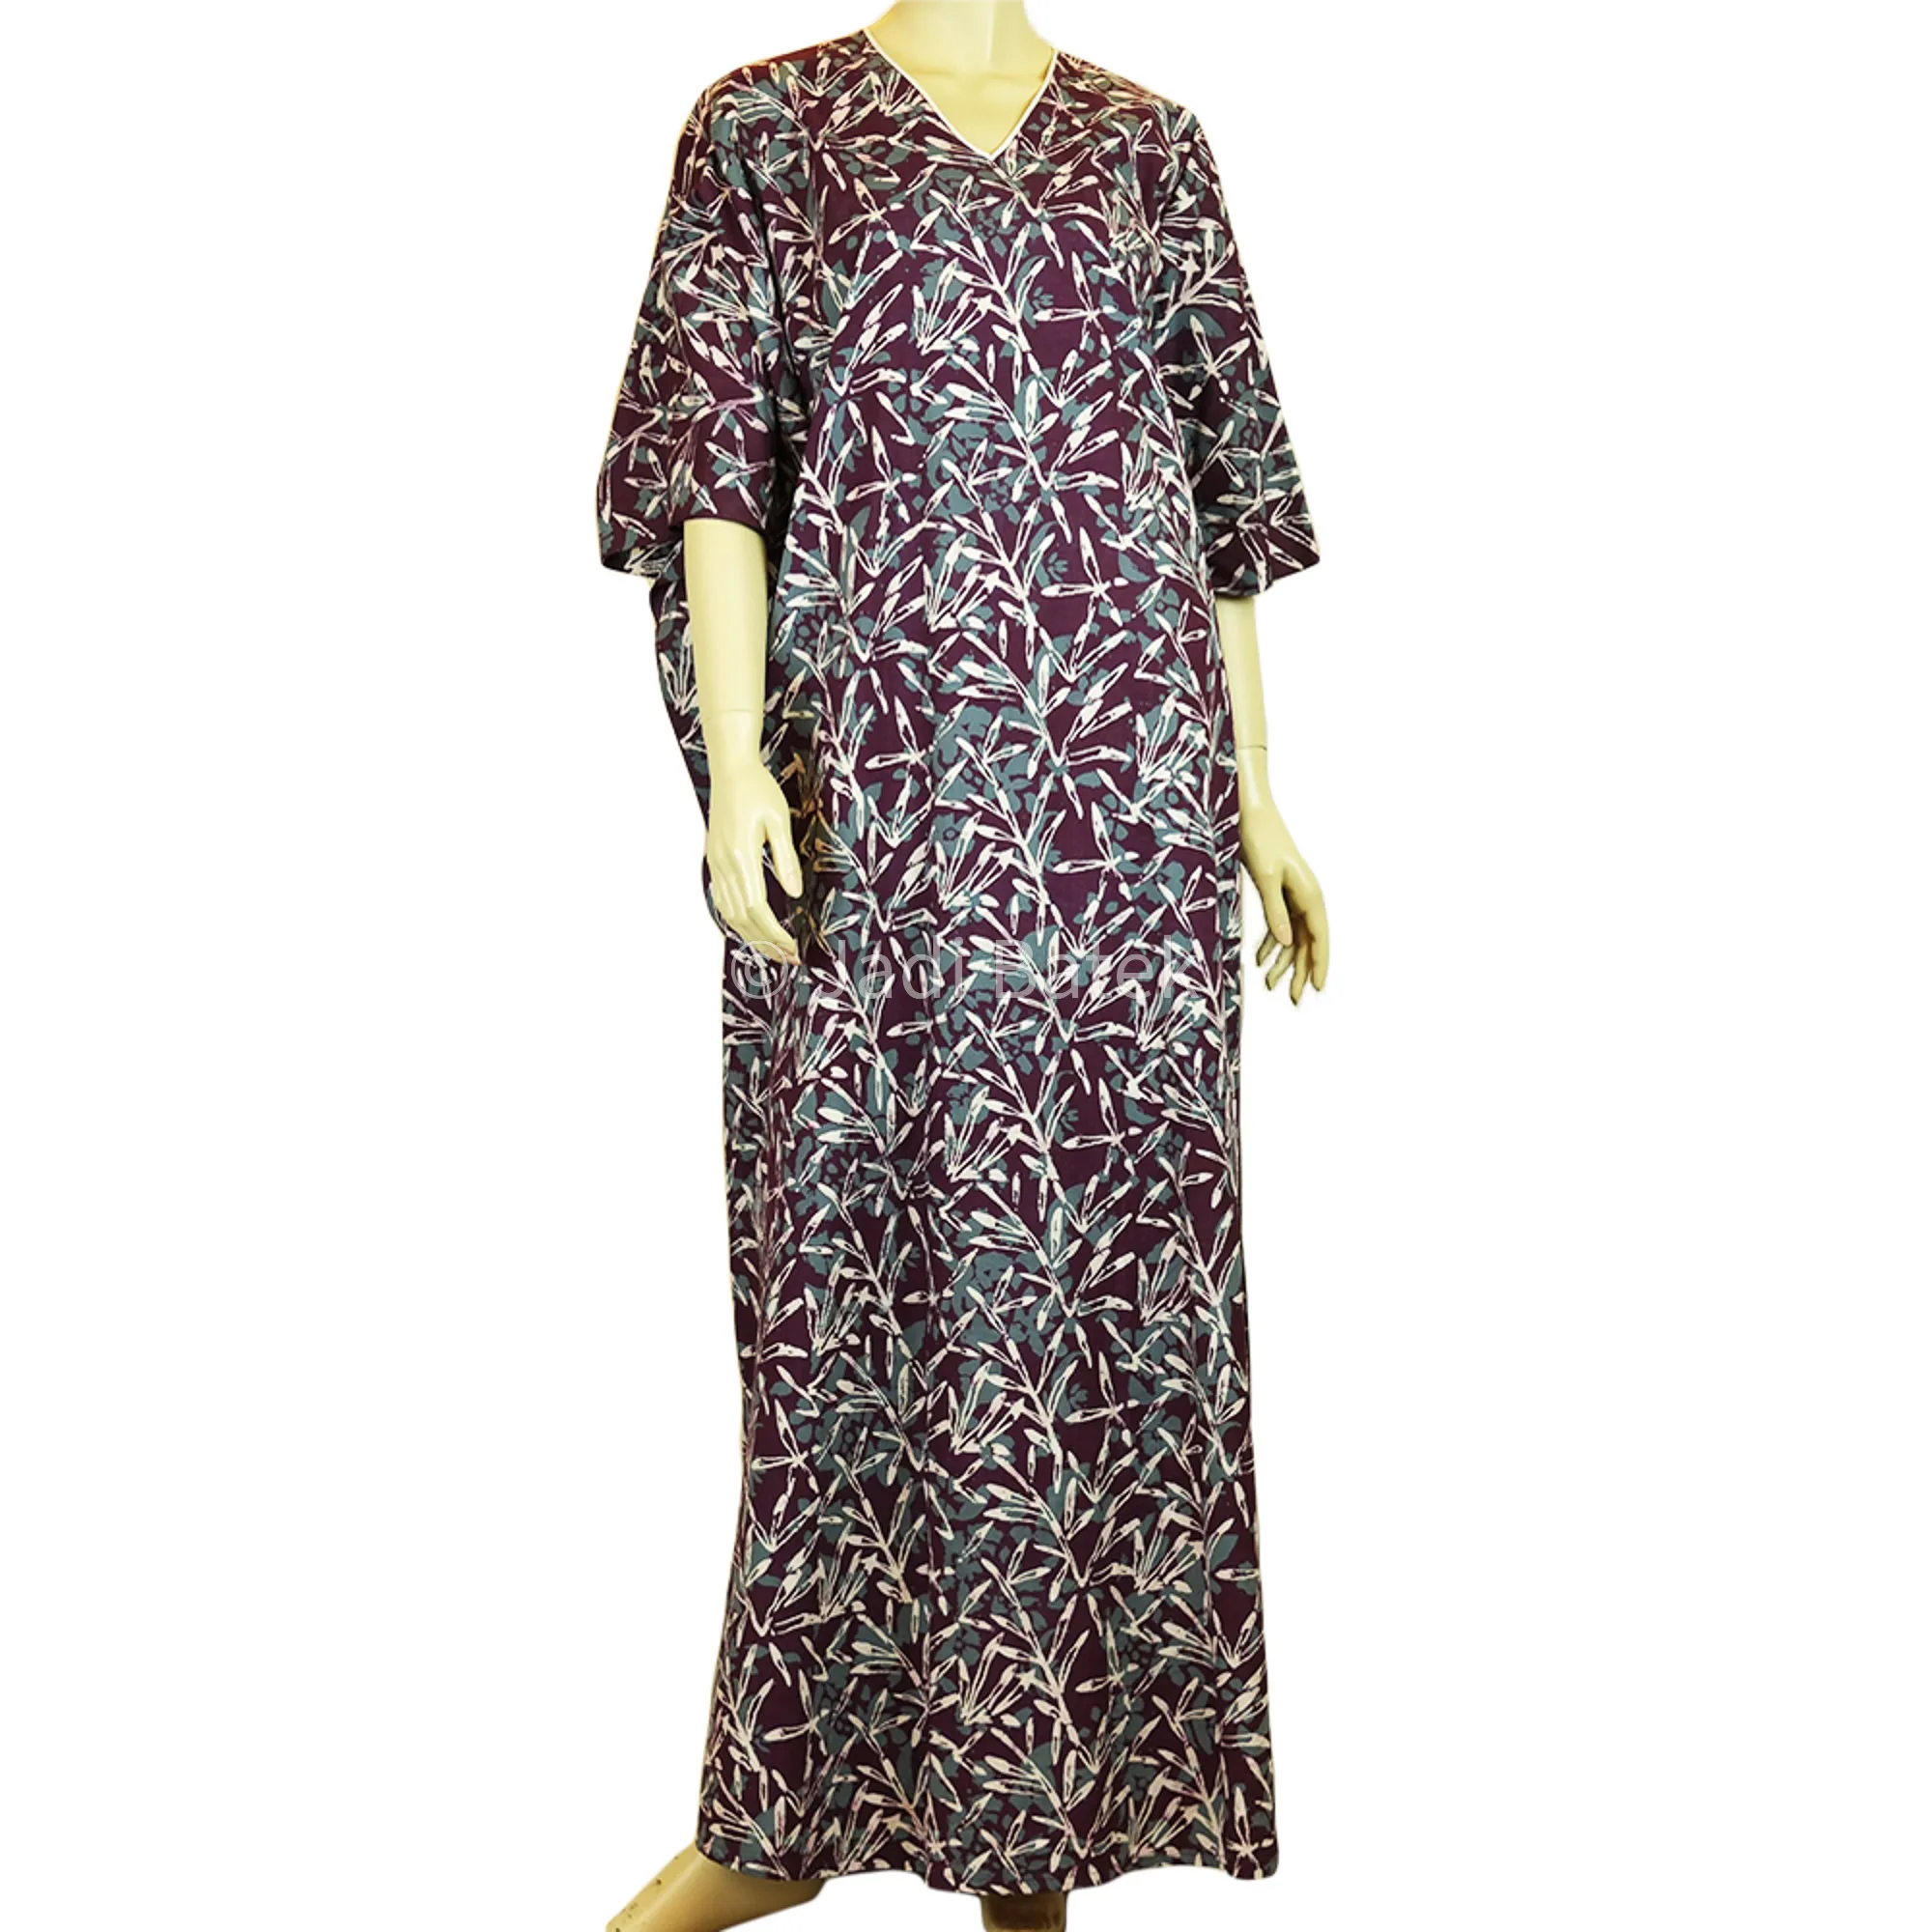 Authentic Malaysian Hand Block Printed Cotton Kaftan - Buy Cotton Kaftan For Woman,Hand Printed Kaftan,Cotton Casual Product on Alibaba.com